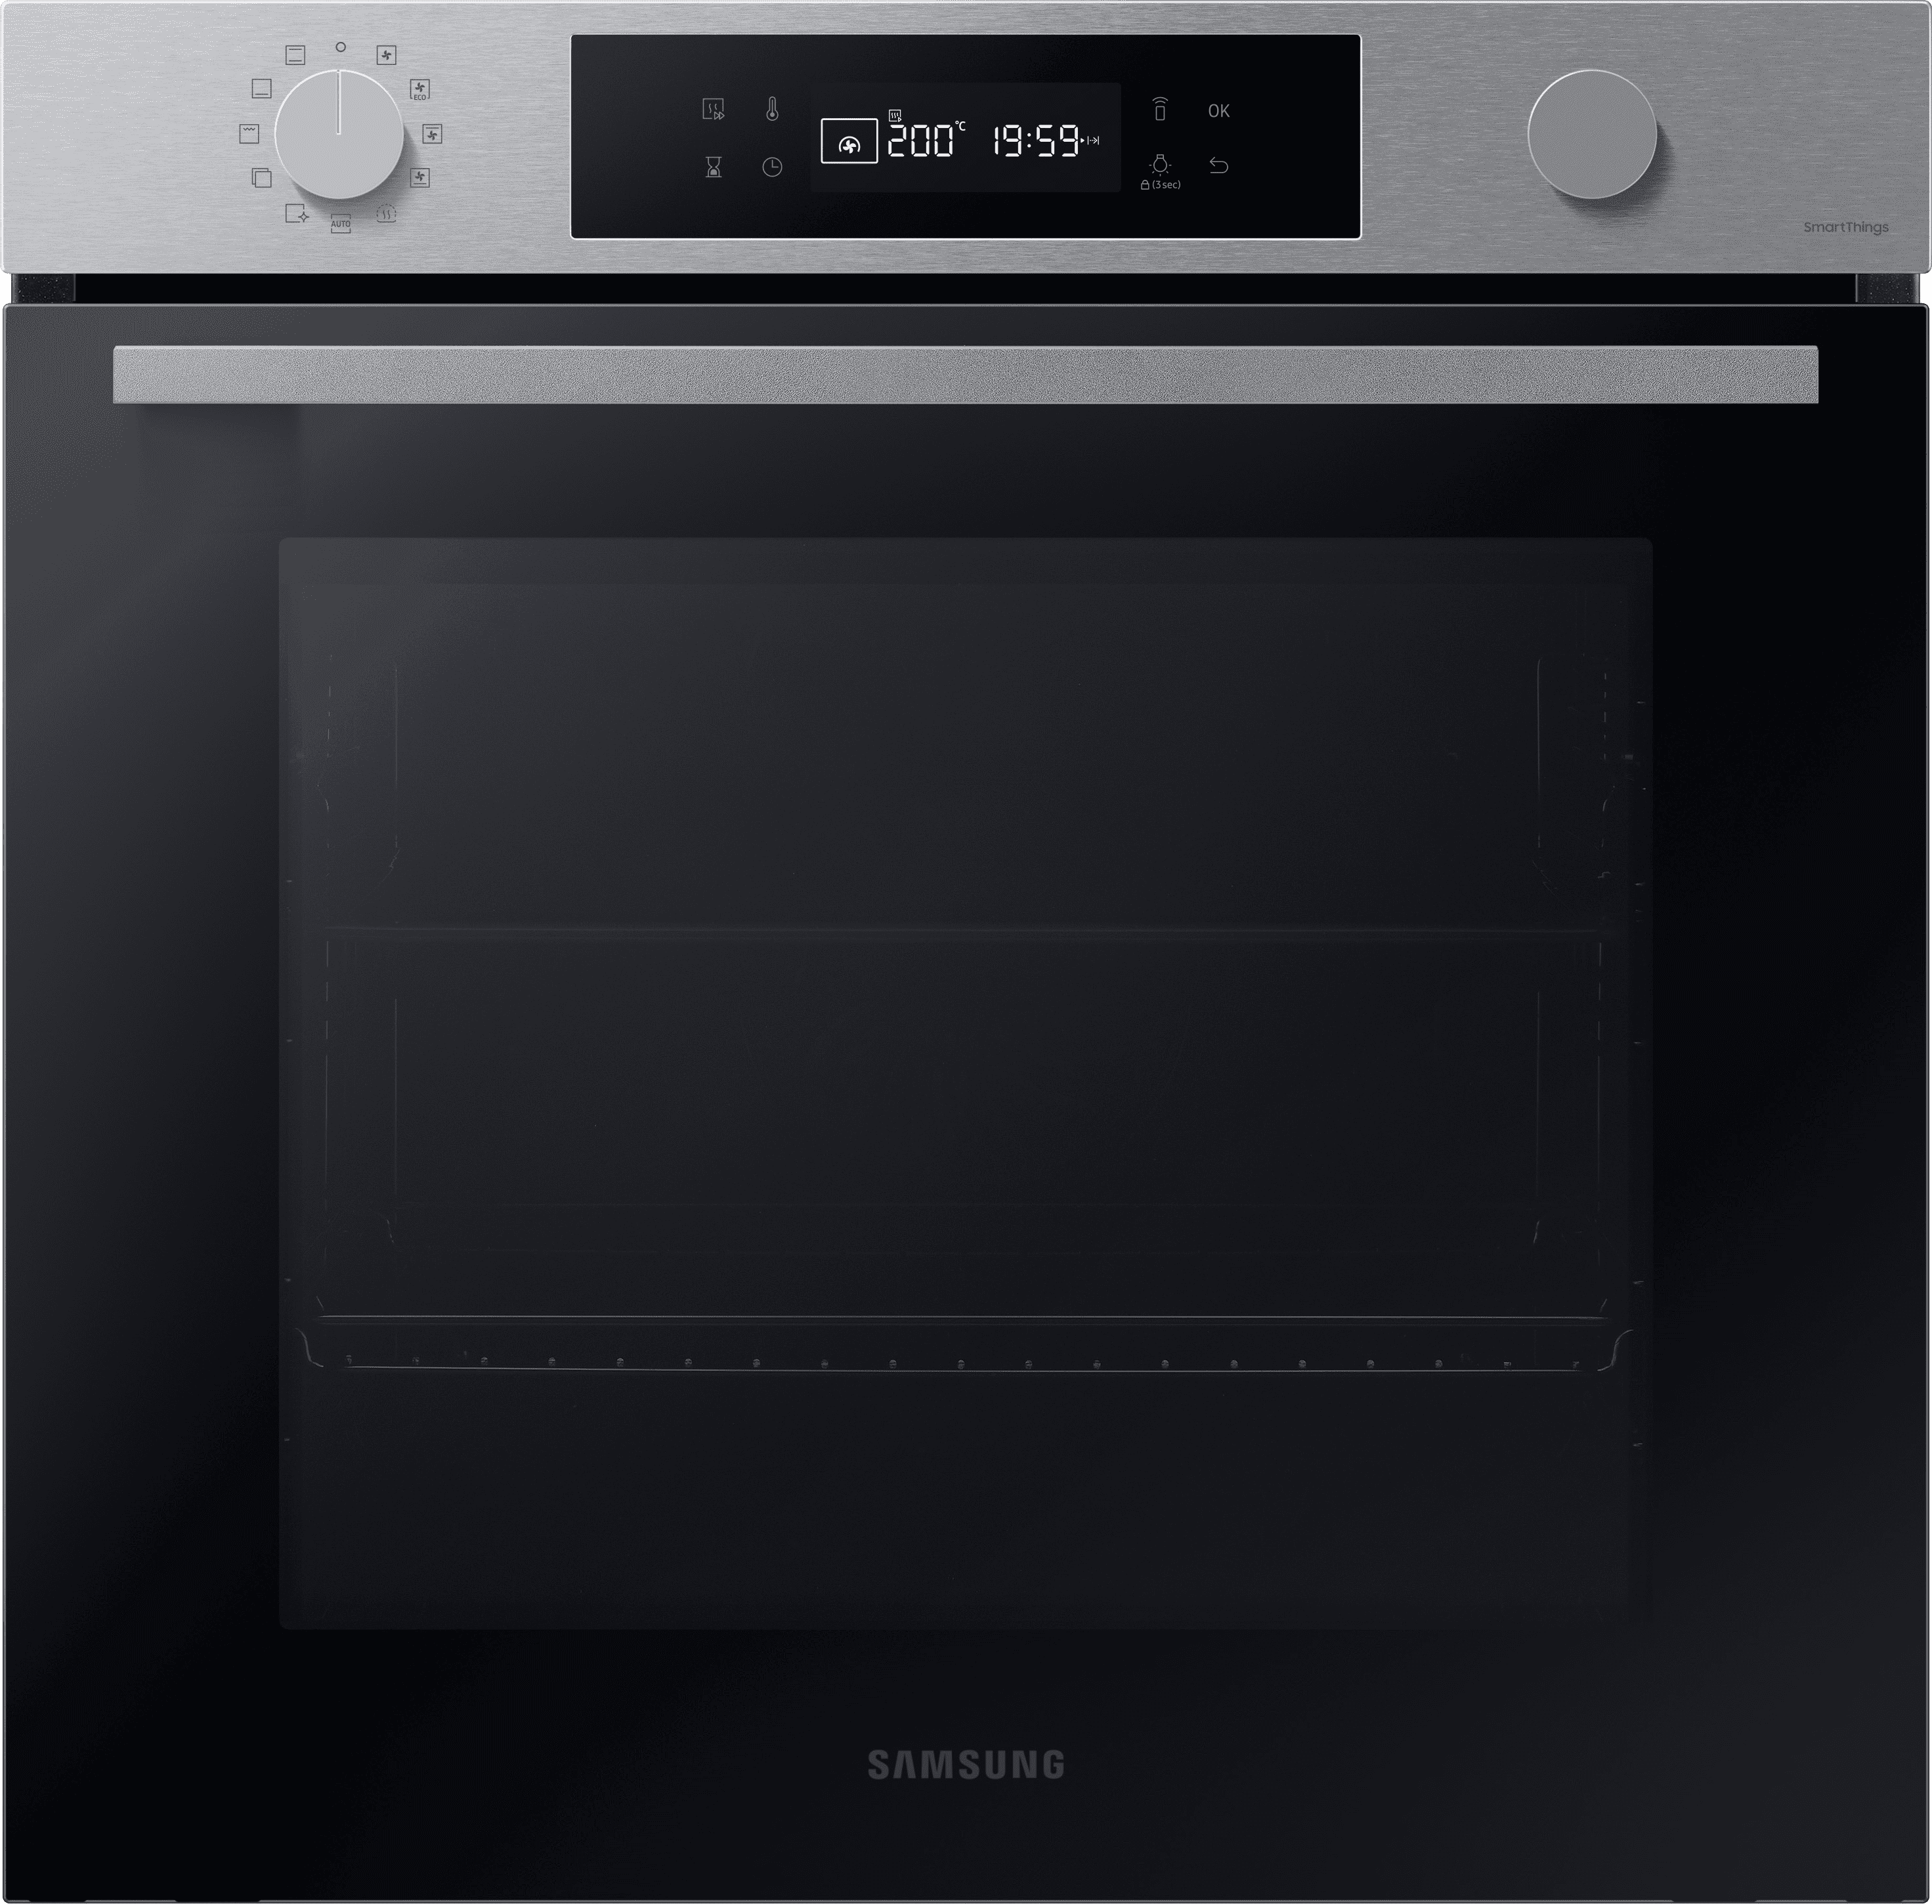 Samsung Bespoke Series 4 NV7B41307AS Wifi Connected Built In Electric Single Oven and Pyrolytic Cleaning - Stainless Steel - A+ Rated, Stainless Steel